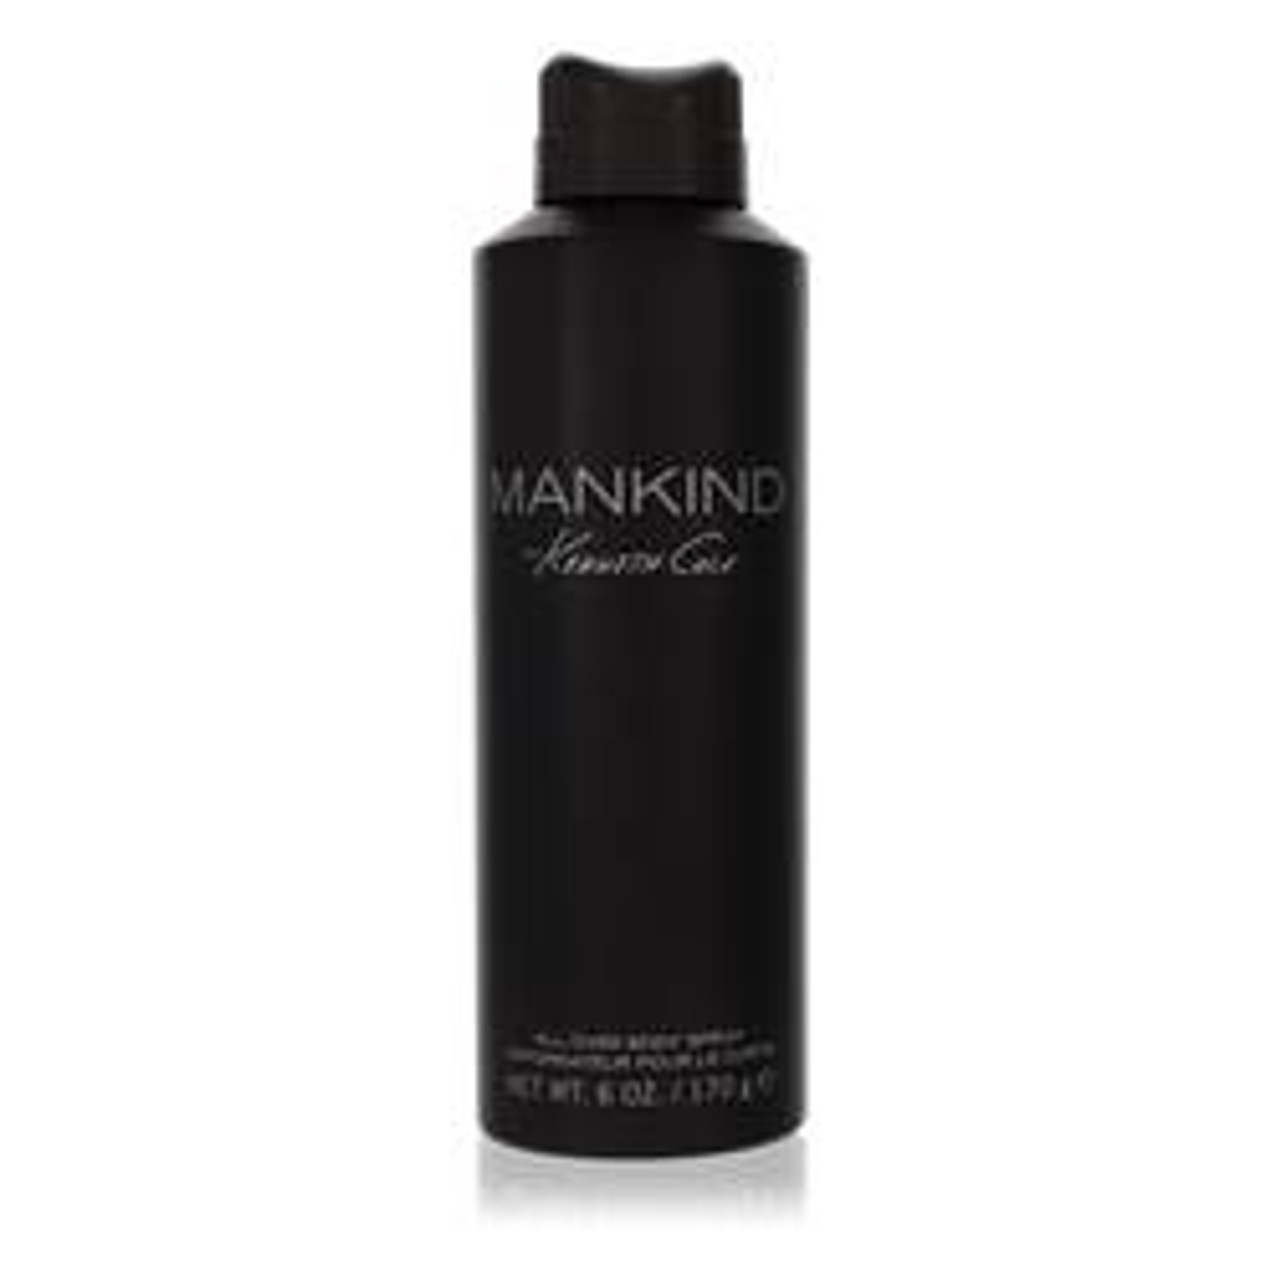 Kenneth Cole Mankind Cologne By Kenneth Cole Body Spray 6 oz for Men - [From 27.00 - Choose pk Qty ] - *Ships from Miami